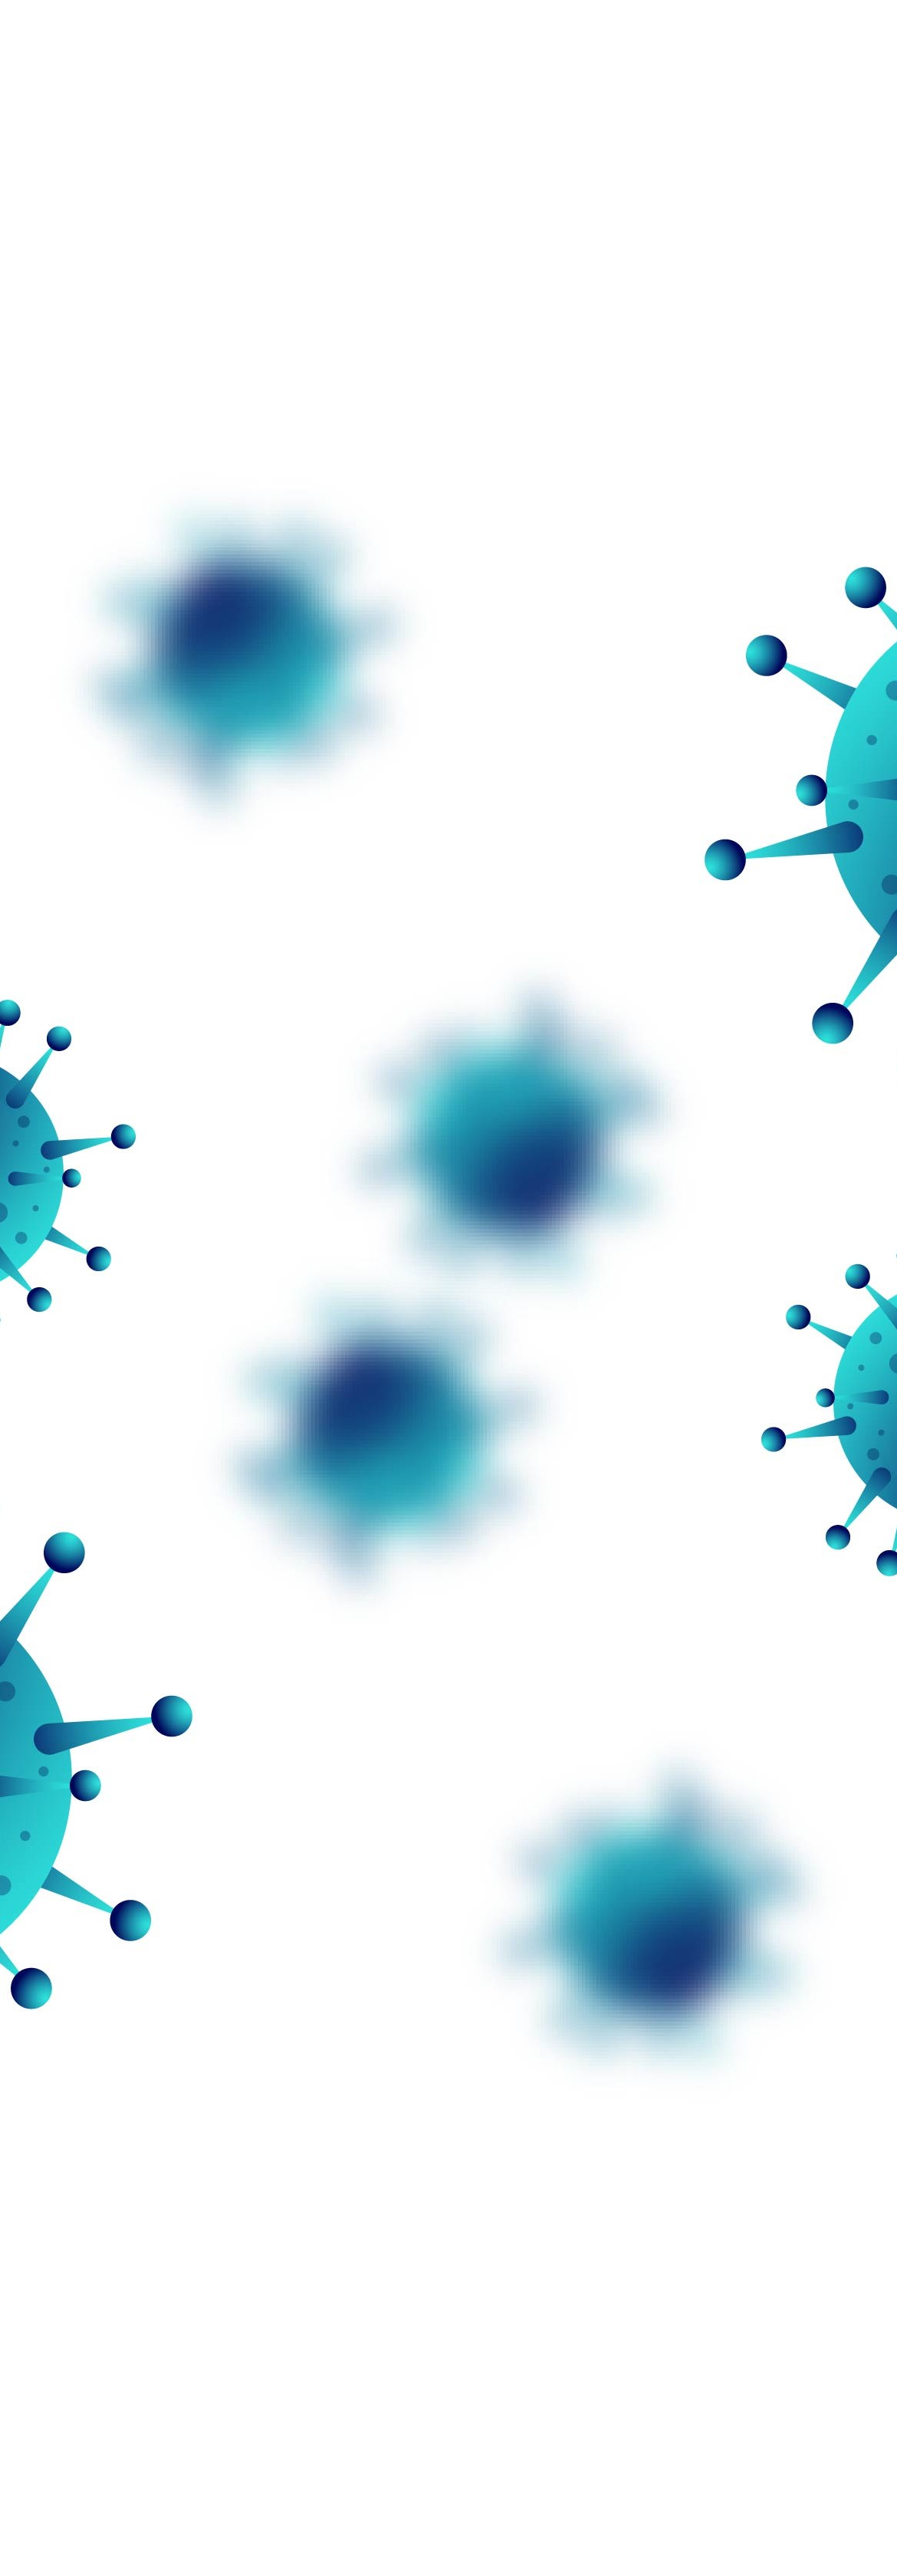 Virus infection or bacteria flu background